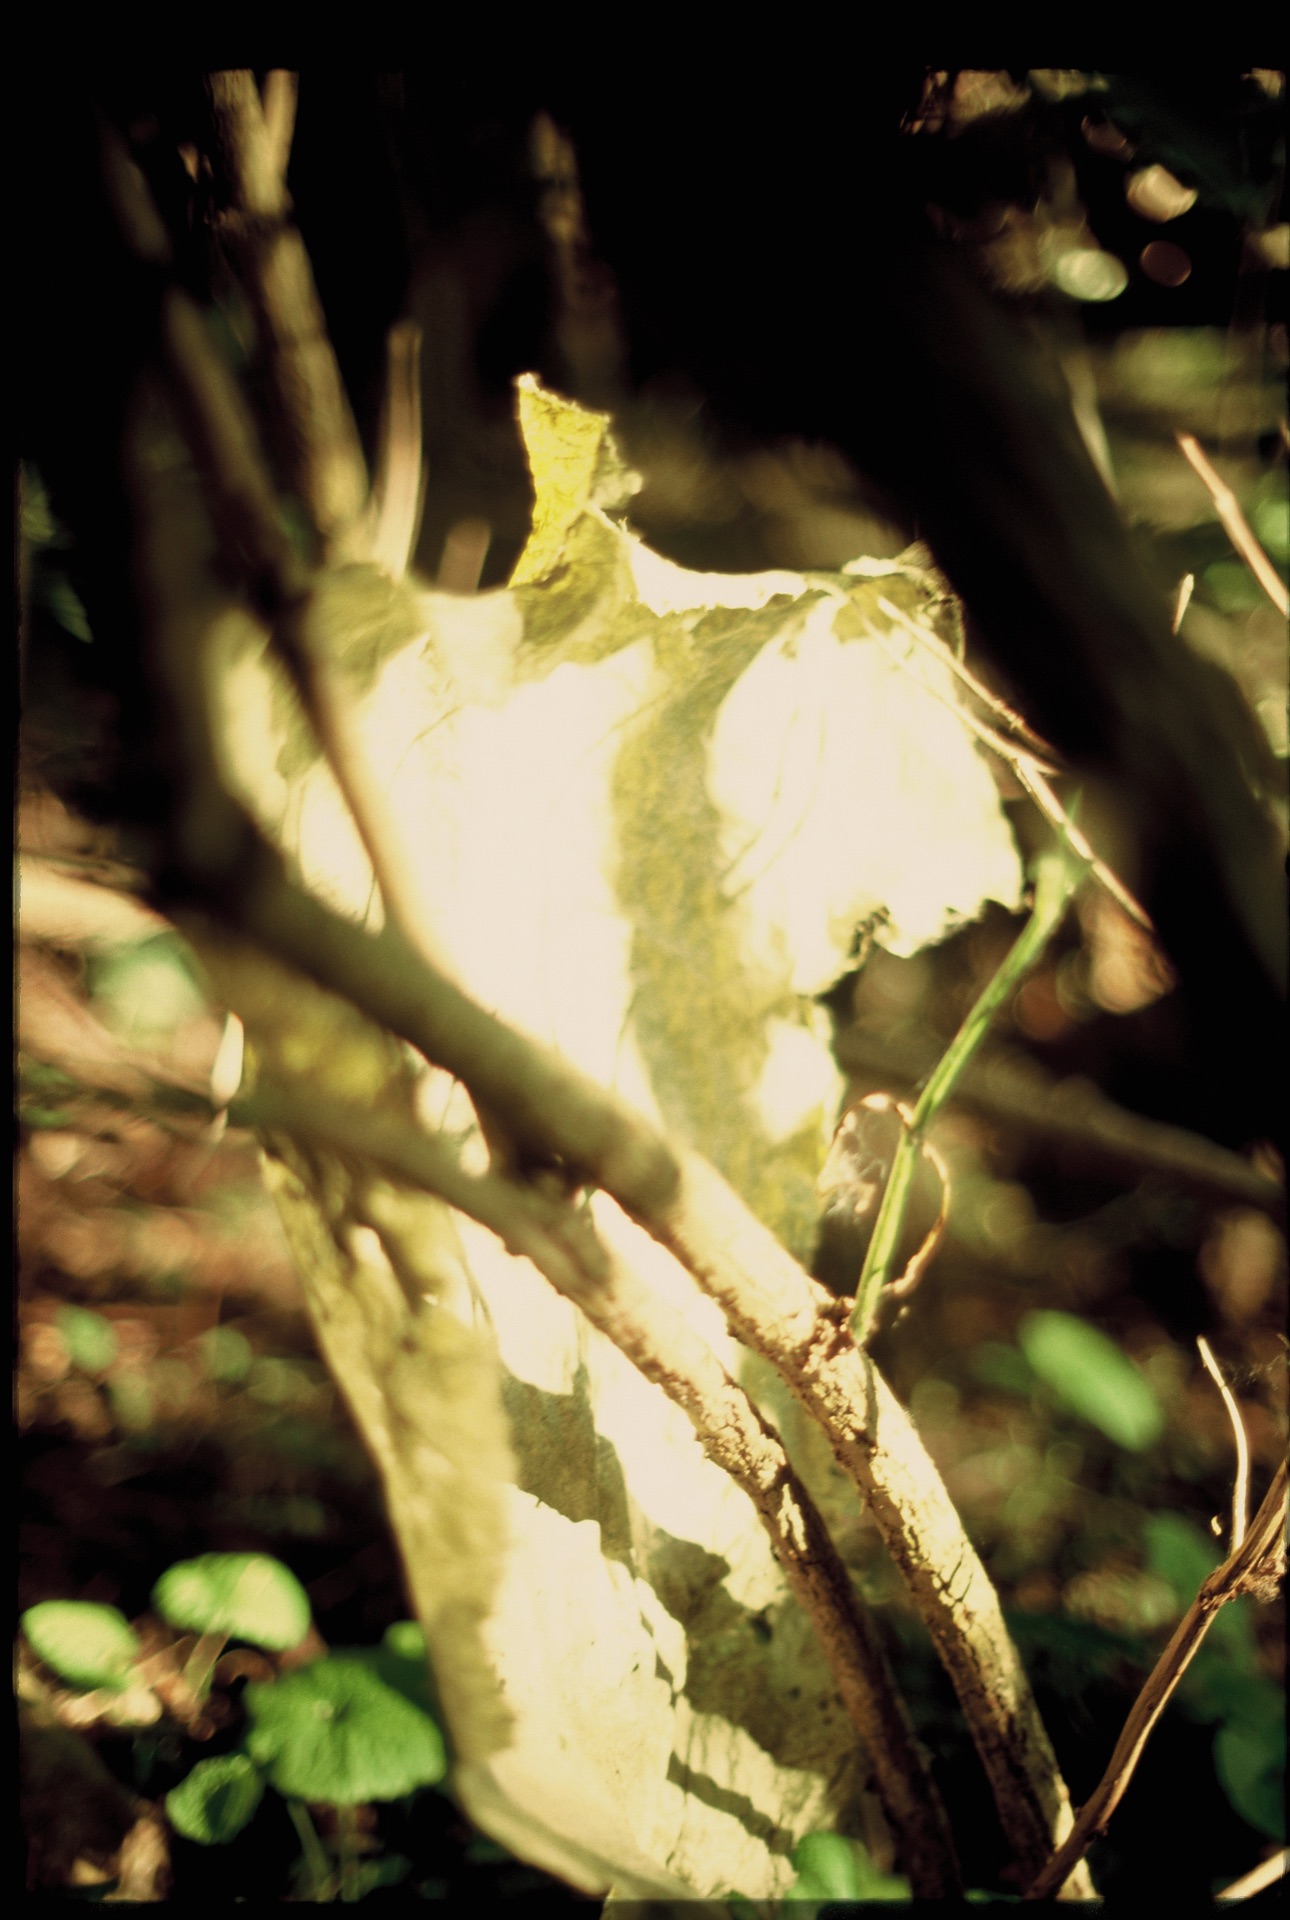 An image of a dried leaf in a forest.